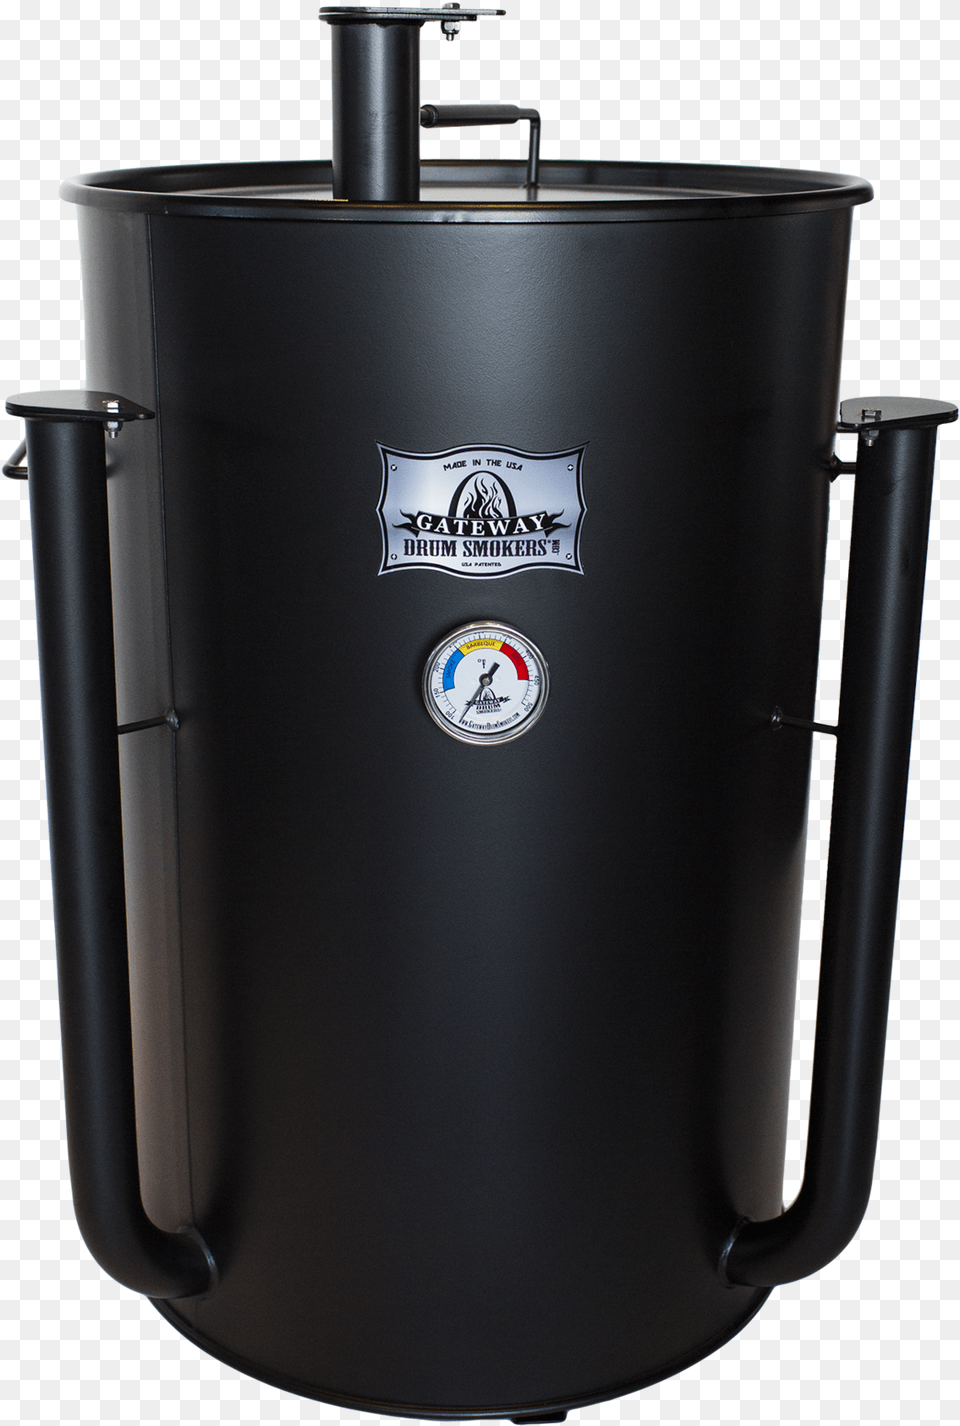 Gateway Drum Smoker, Device, Appliance, Electrical Device Png